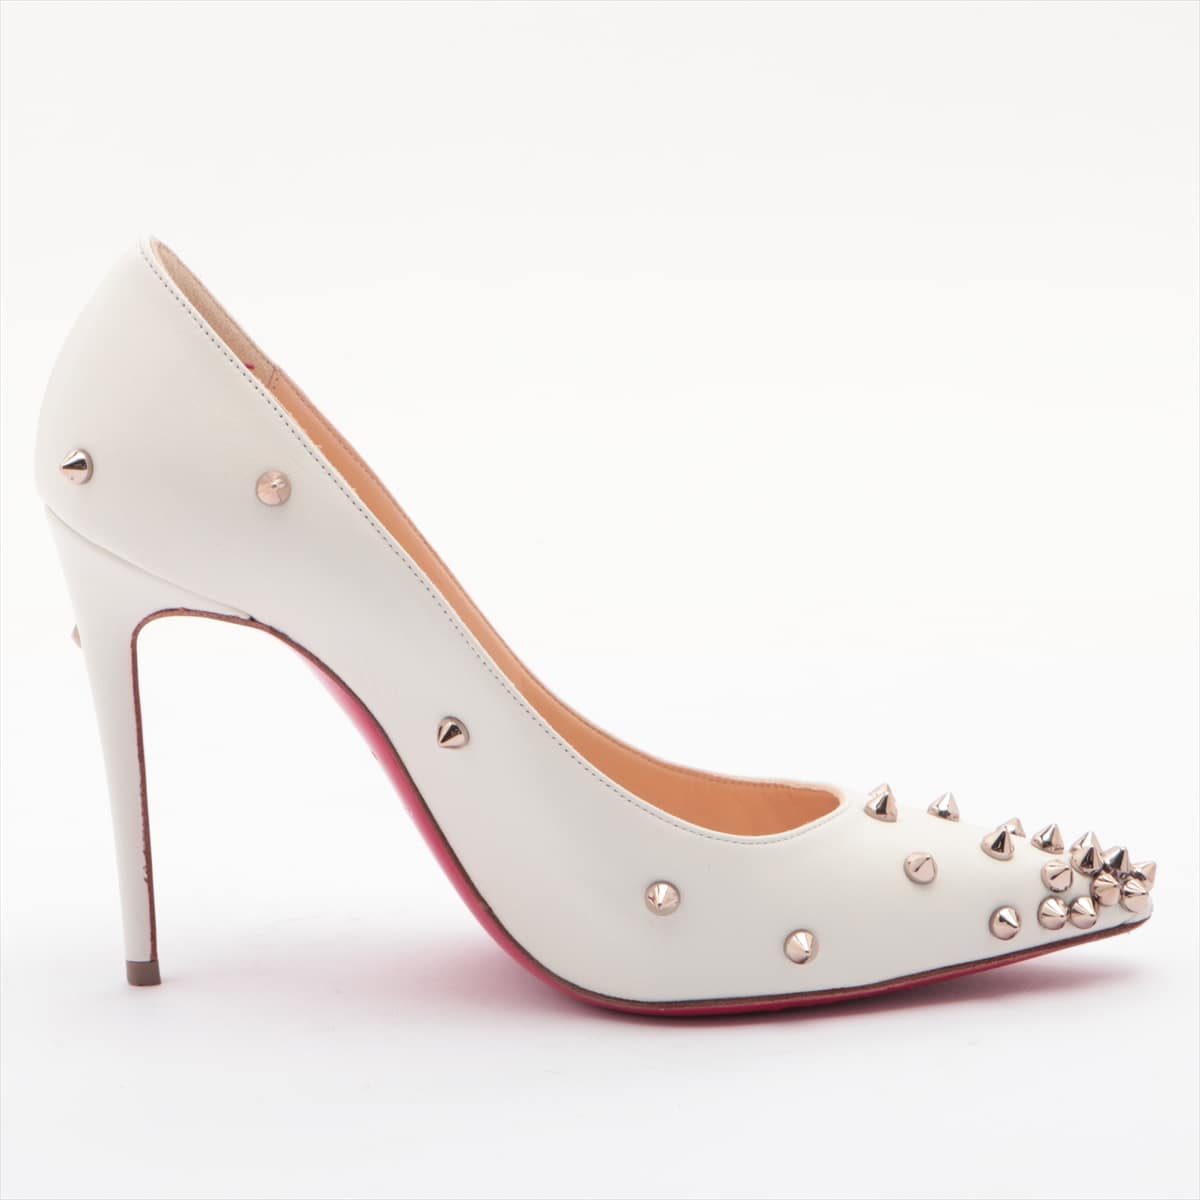 Christian Louboutin Leather Pumps 34.5 Ladies' White Spike Studs